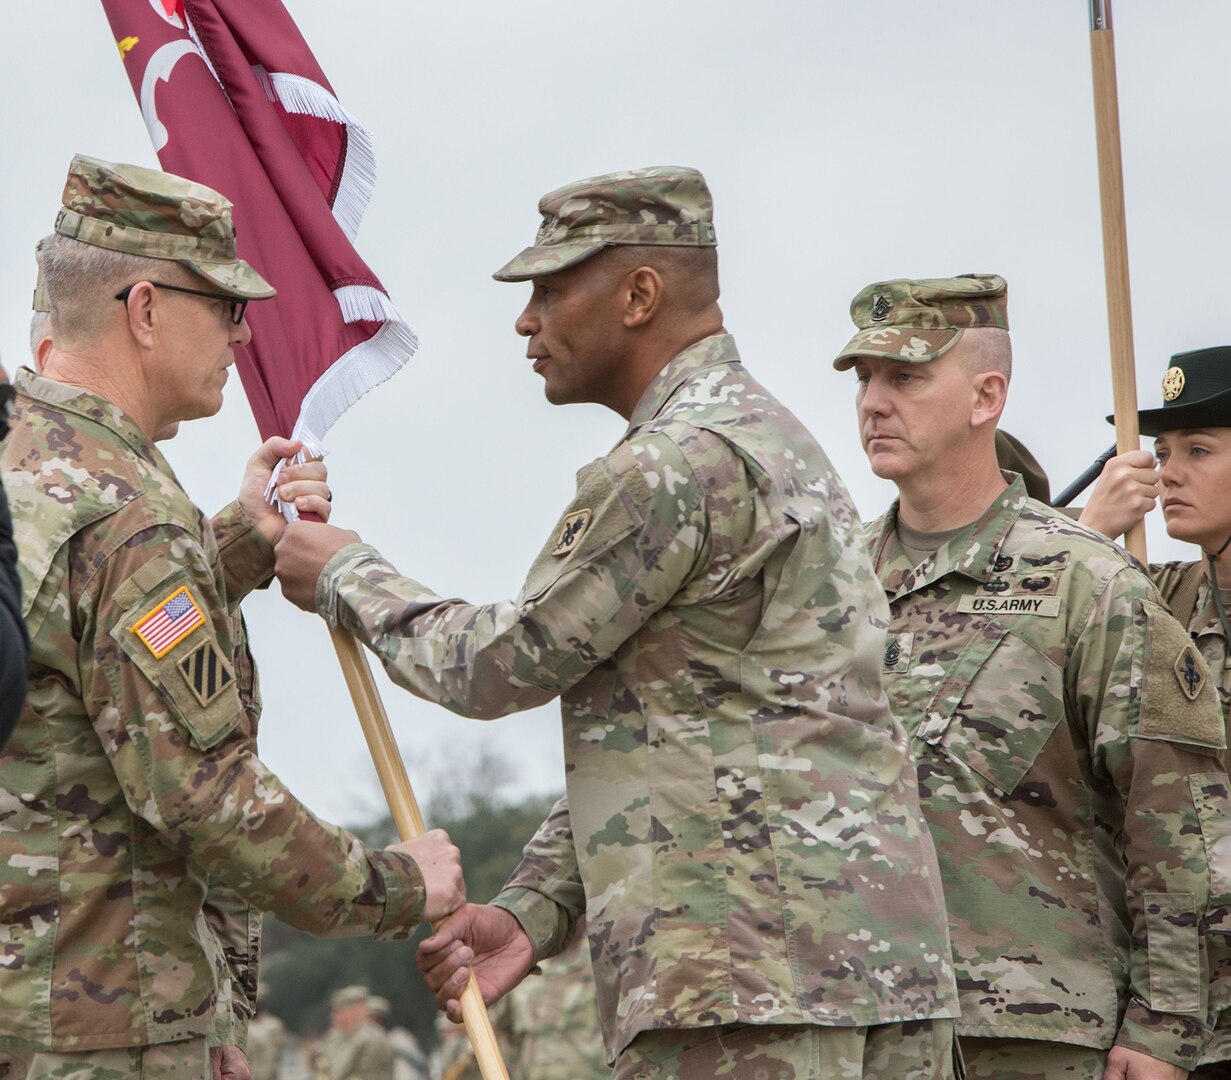 Lt. Gen. James E. Rainey (left), commanding general, U.S. Army Combined Arms Center, accepts the MEDCoE colors from outgoing commander Maj. Gen. Patrick D. Sargent  during the U.S. Army Medical Center of Excellence change of command ceremony at Joint Base San Antonio-Fort Sam Houston Jan. 10.